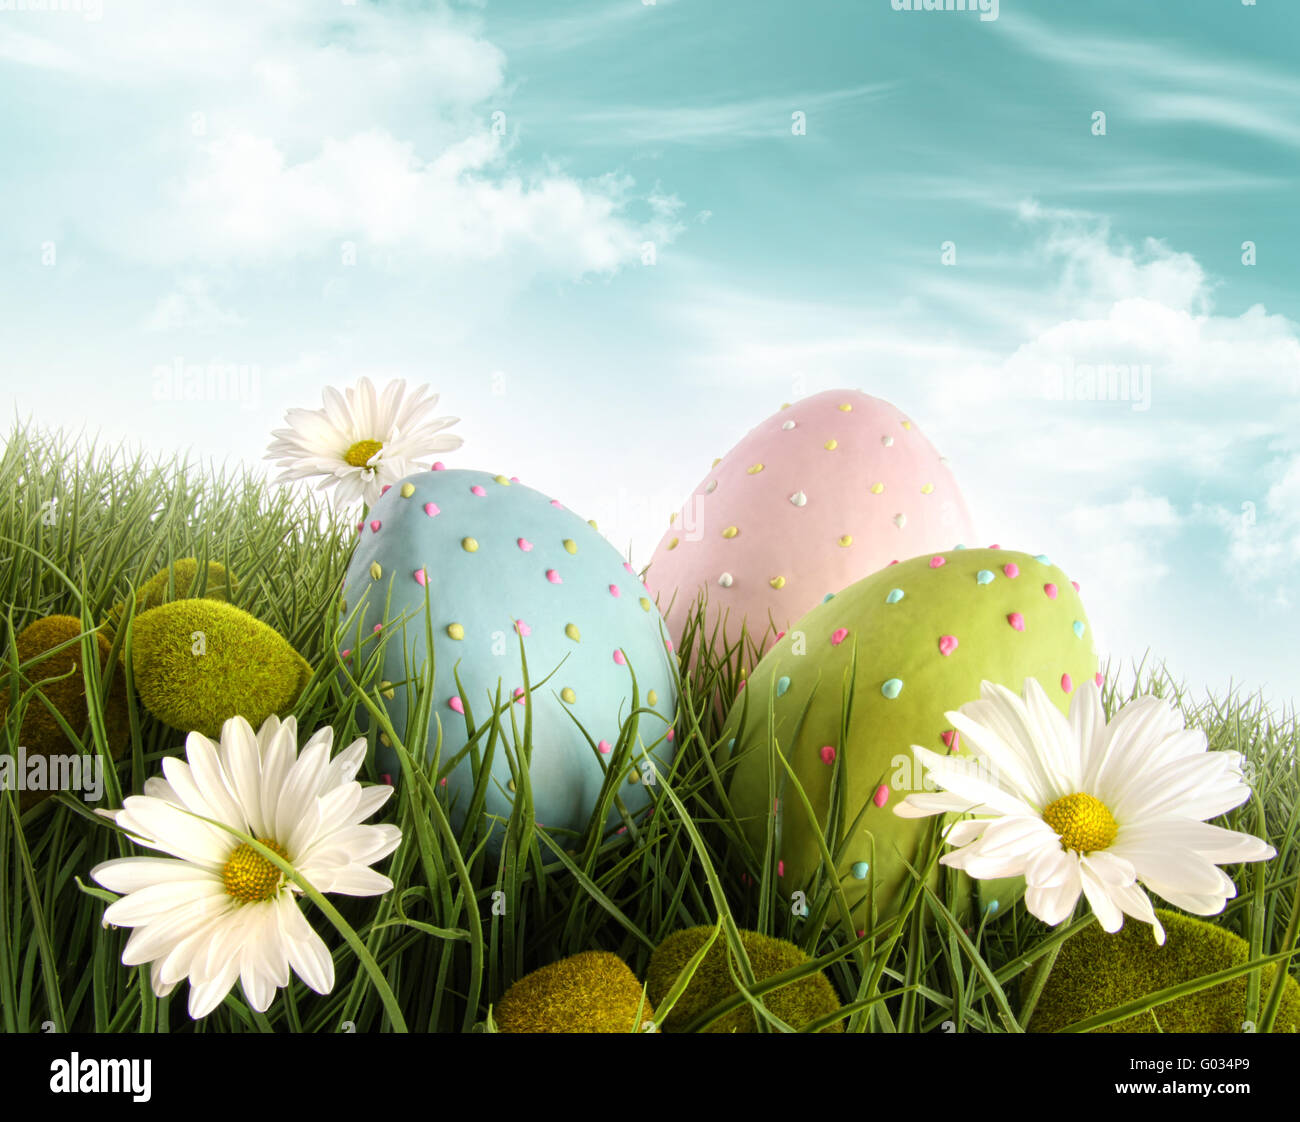 Decorated easter eggs in the grass with daisies Stock Photo